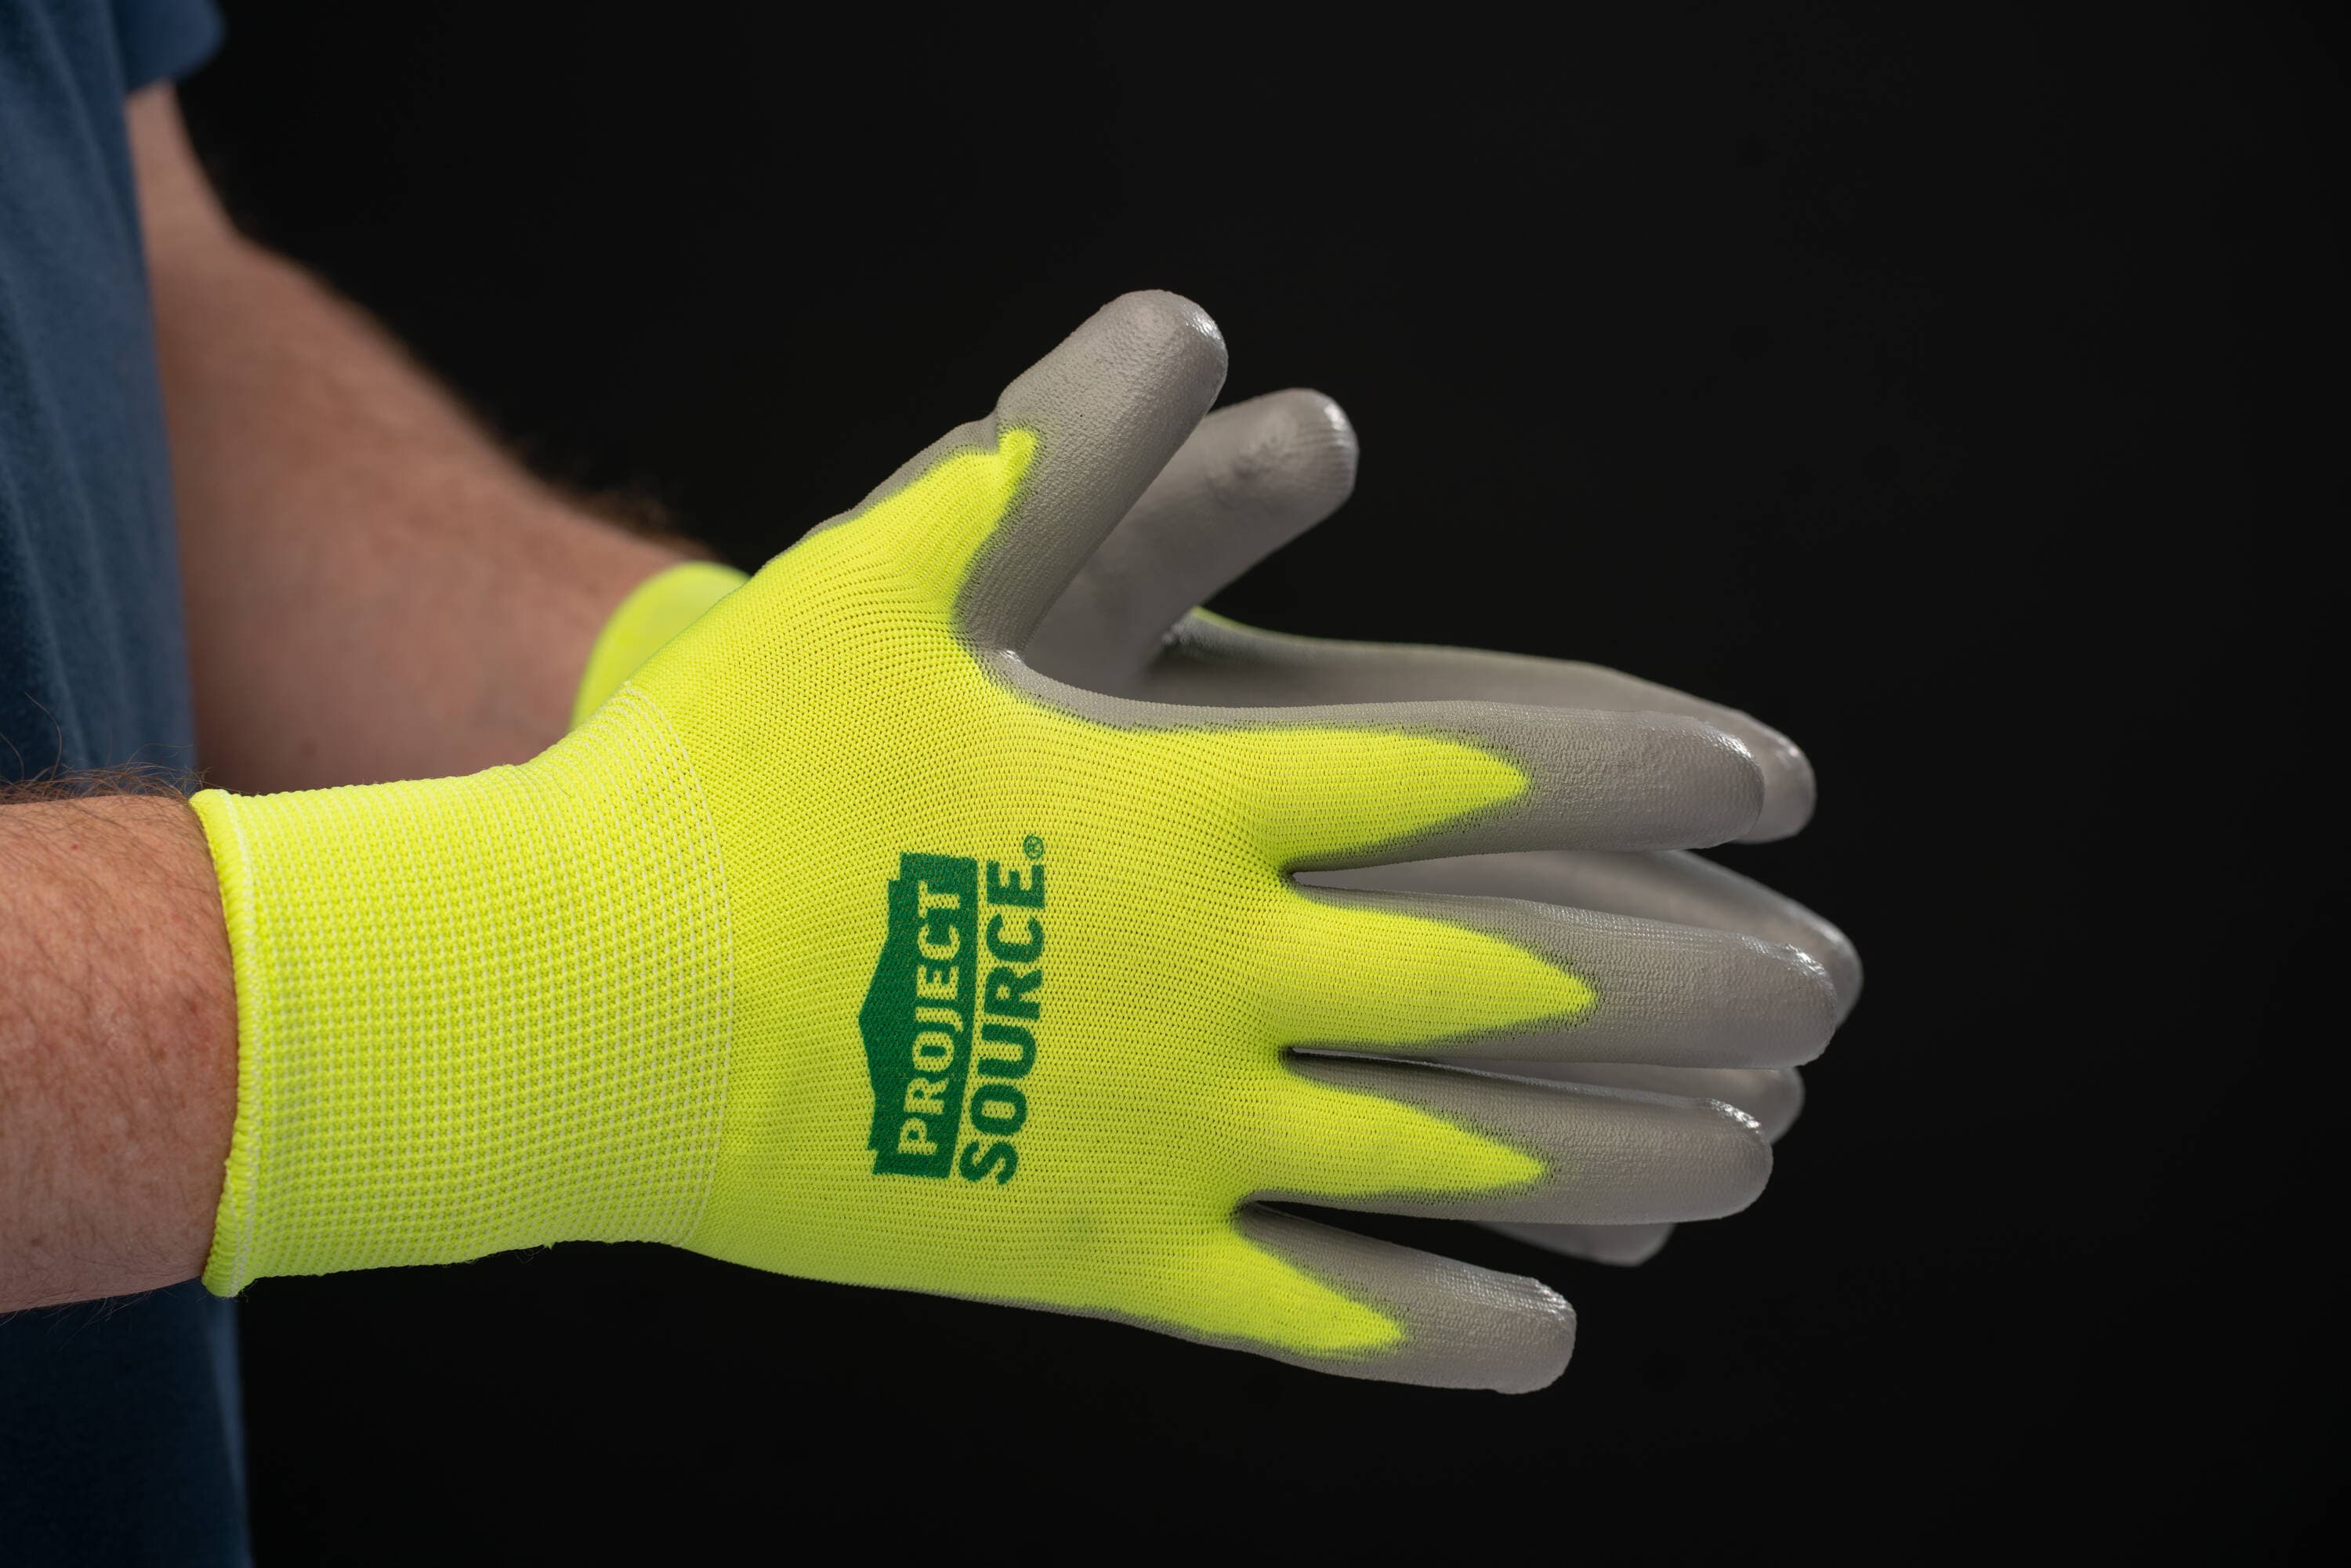 Project Source Large Polyester Construction Gloves, (1-Pair) in